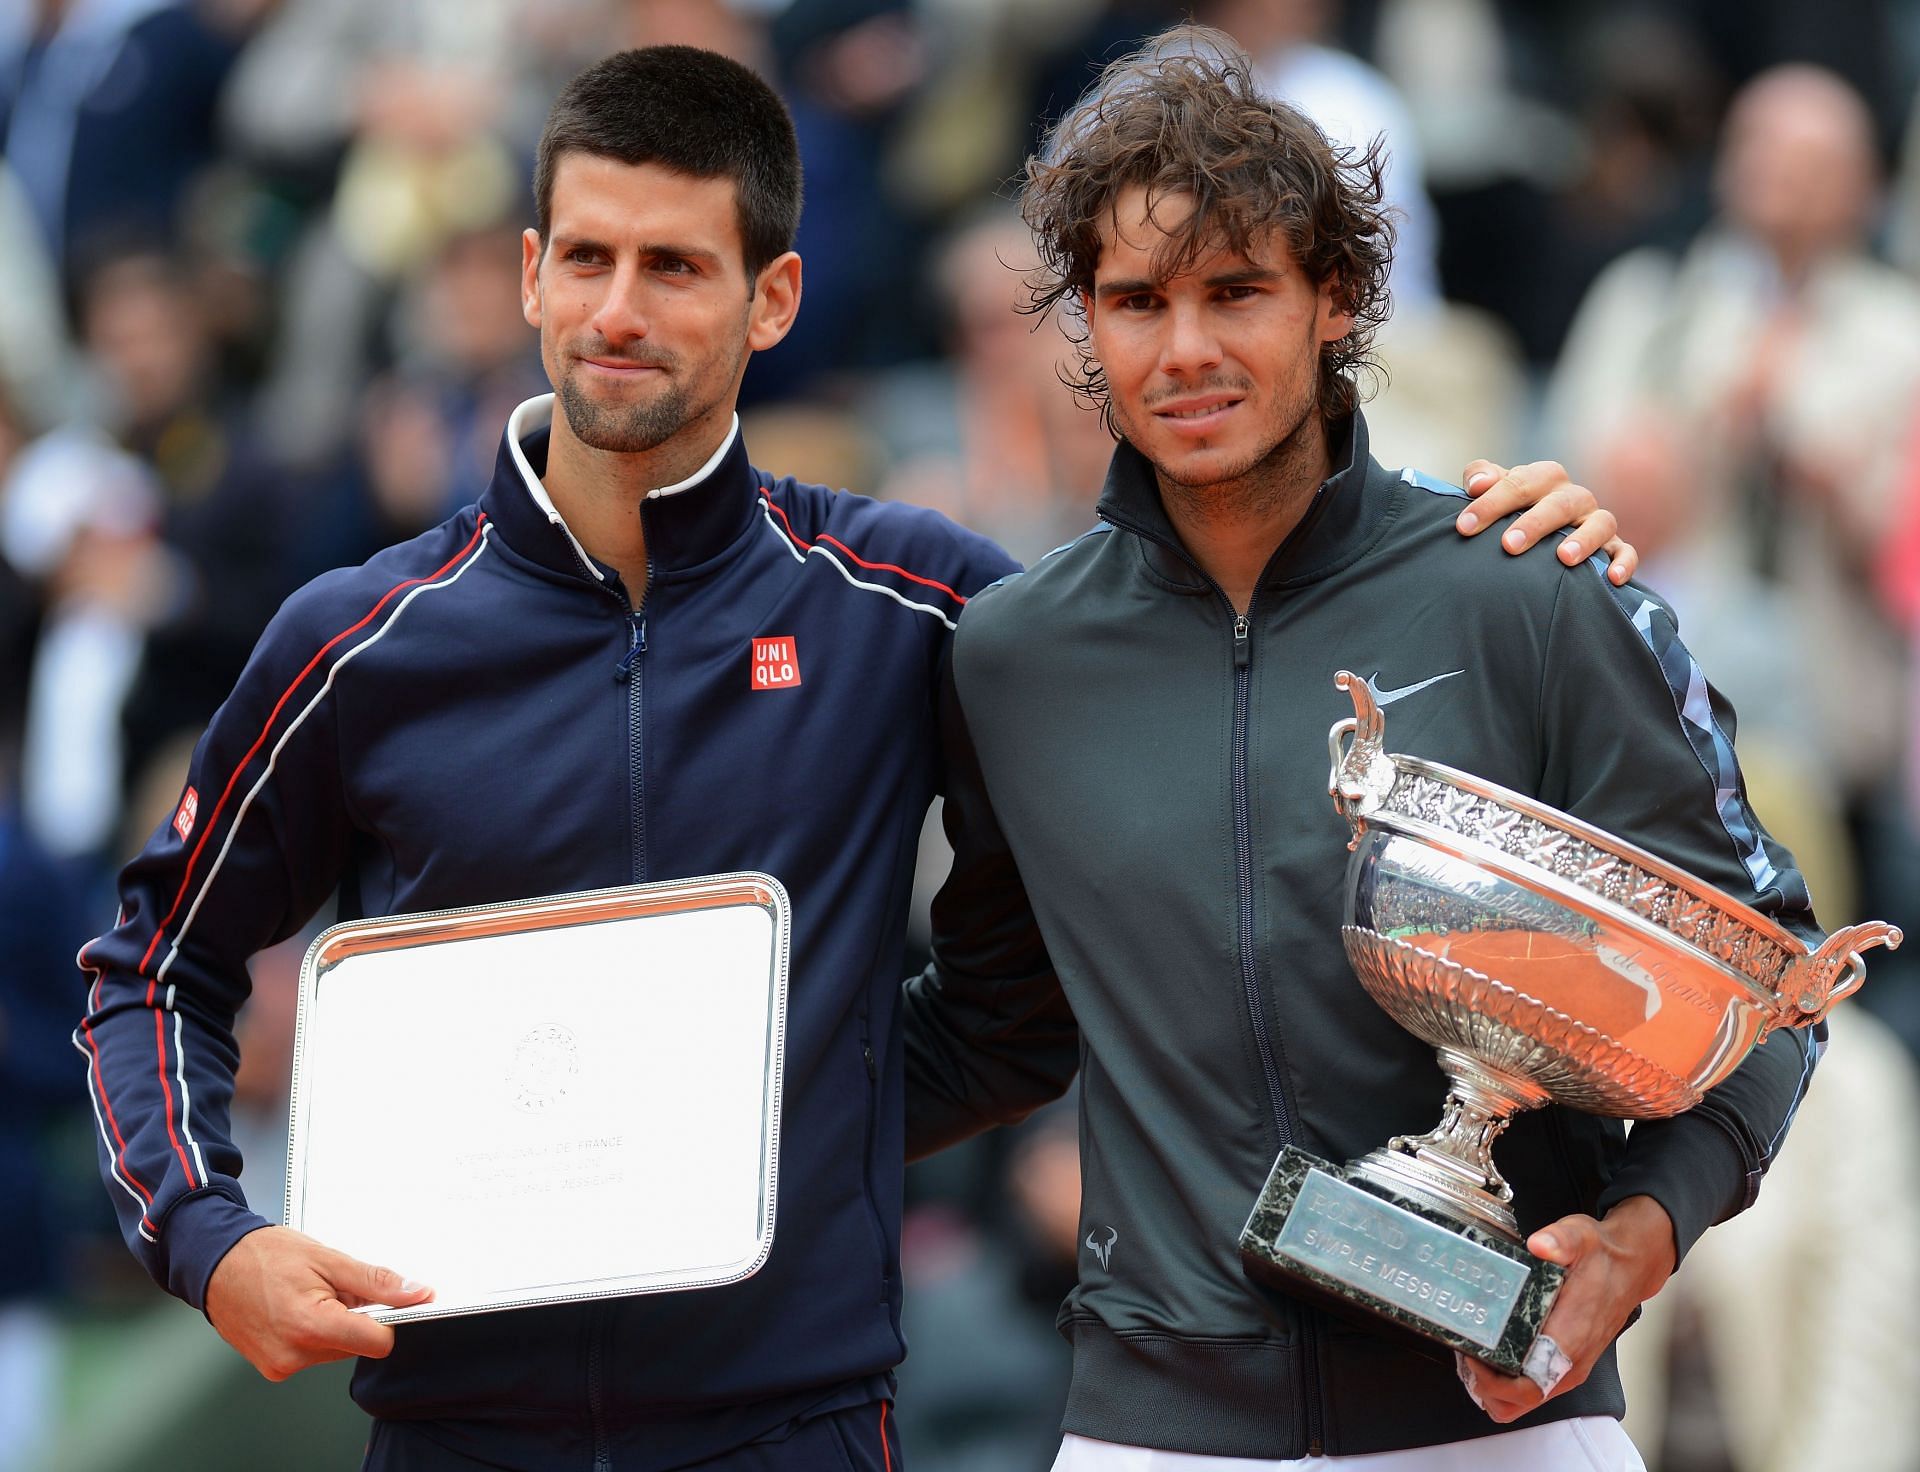 Rafael Nadal and Novak Djokovic have both reached the quarterfinals of the 2022 Madrid Open